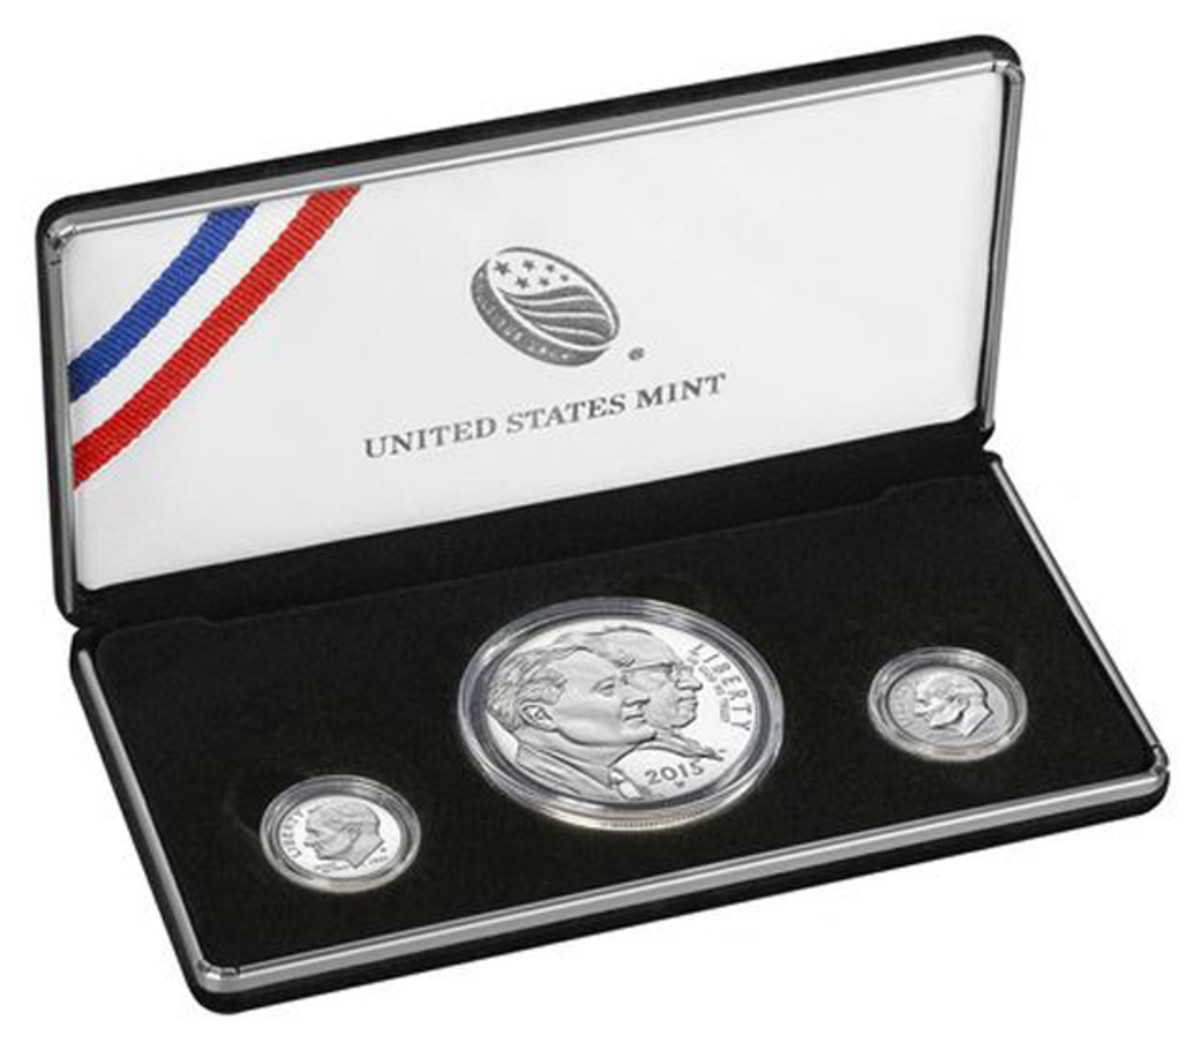 The March of Dimes three-coin set goes on sale May 4. It has a mintage of 75,000 sets.